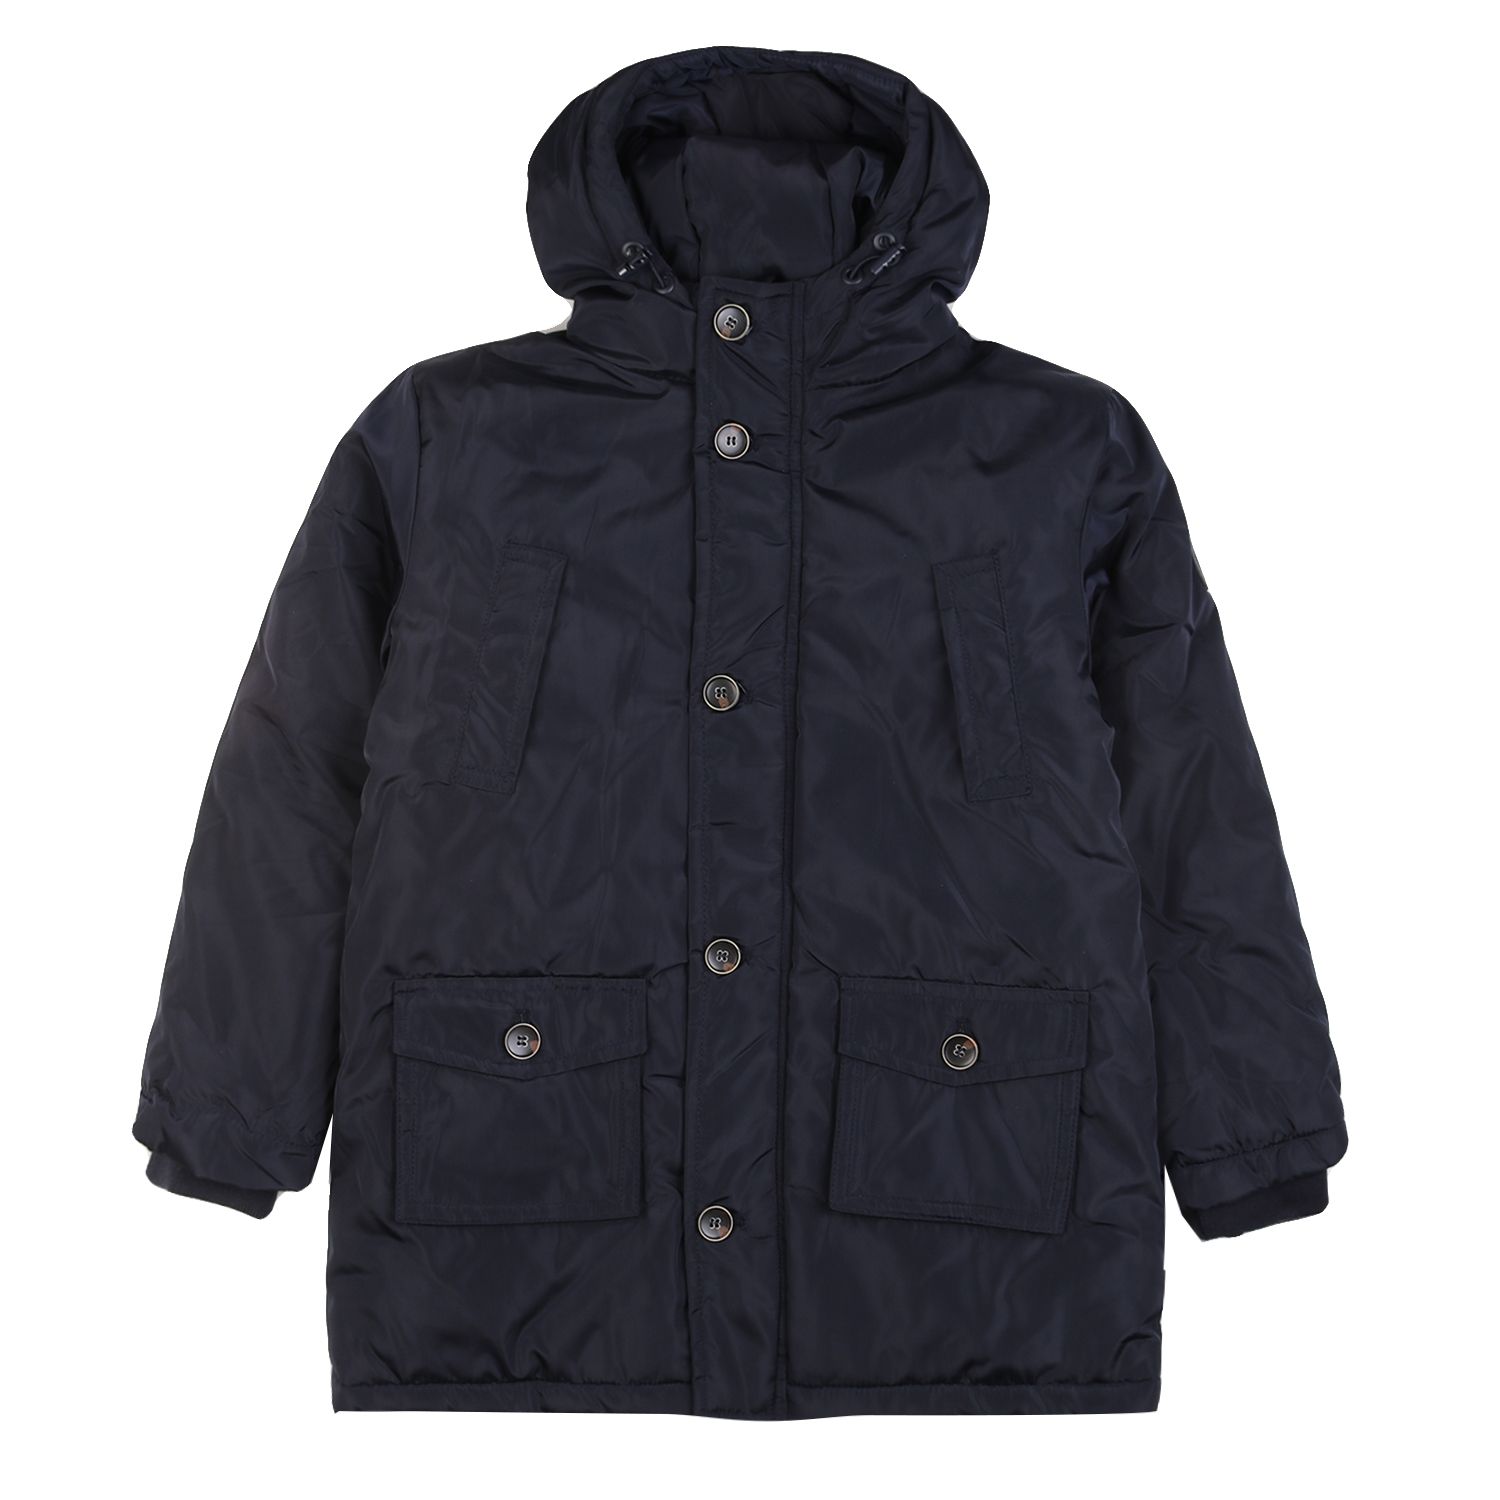 Harmont & Blaine navy blue coat -Outerwear details parka, with hood, long sleeves with elastic cuffs, completely blue, logo on the shoulder, 4 pockets, central closure with button and zip -Washing max 30 °